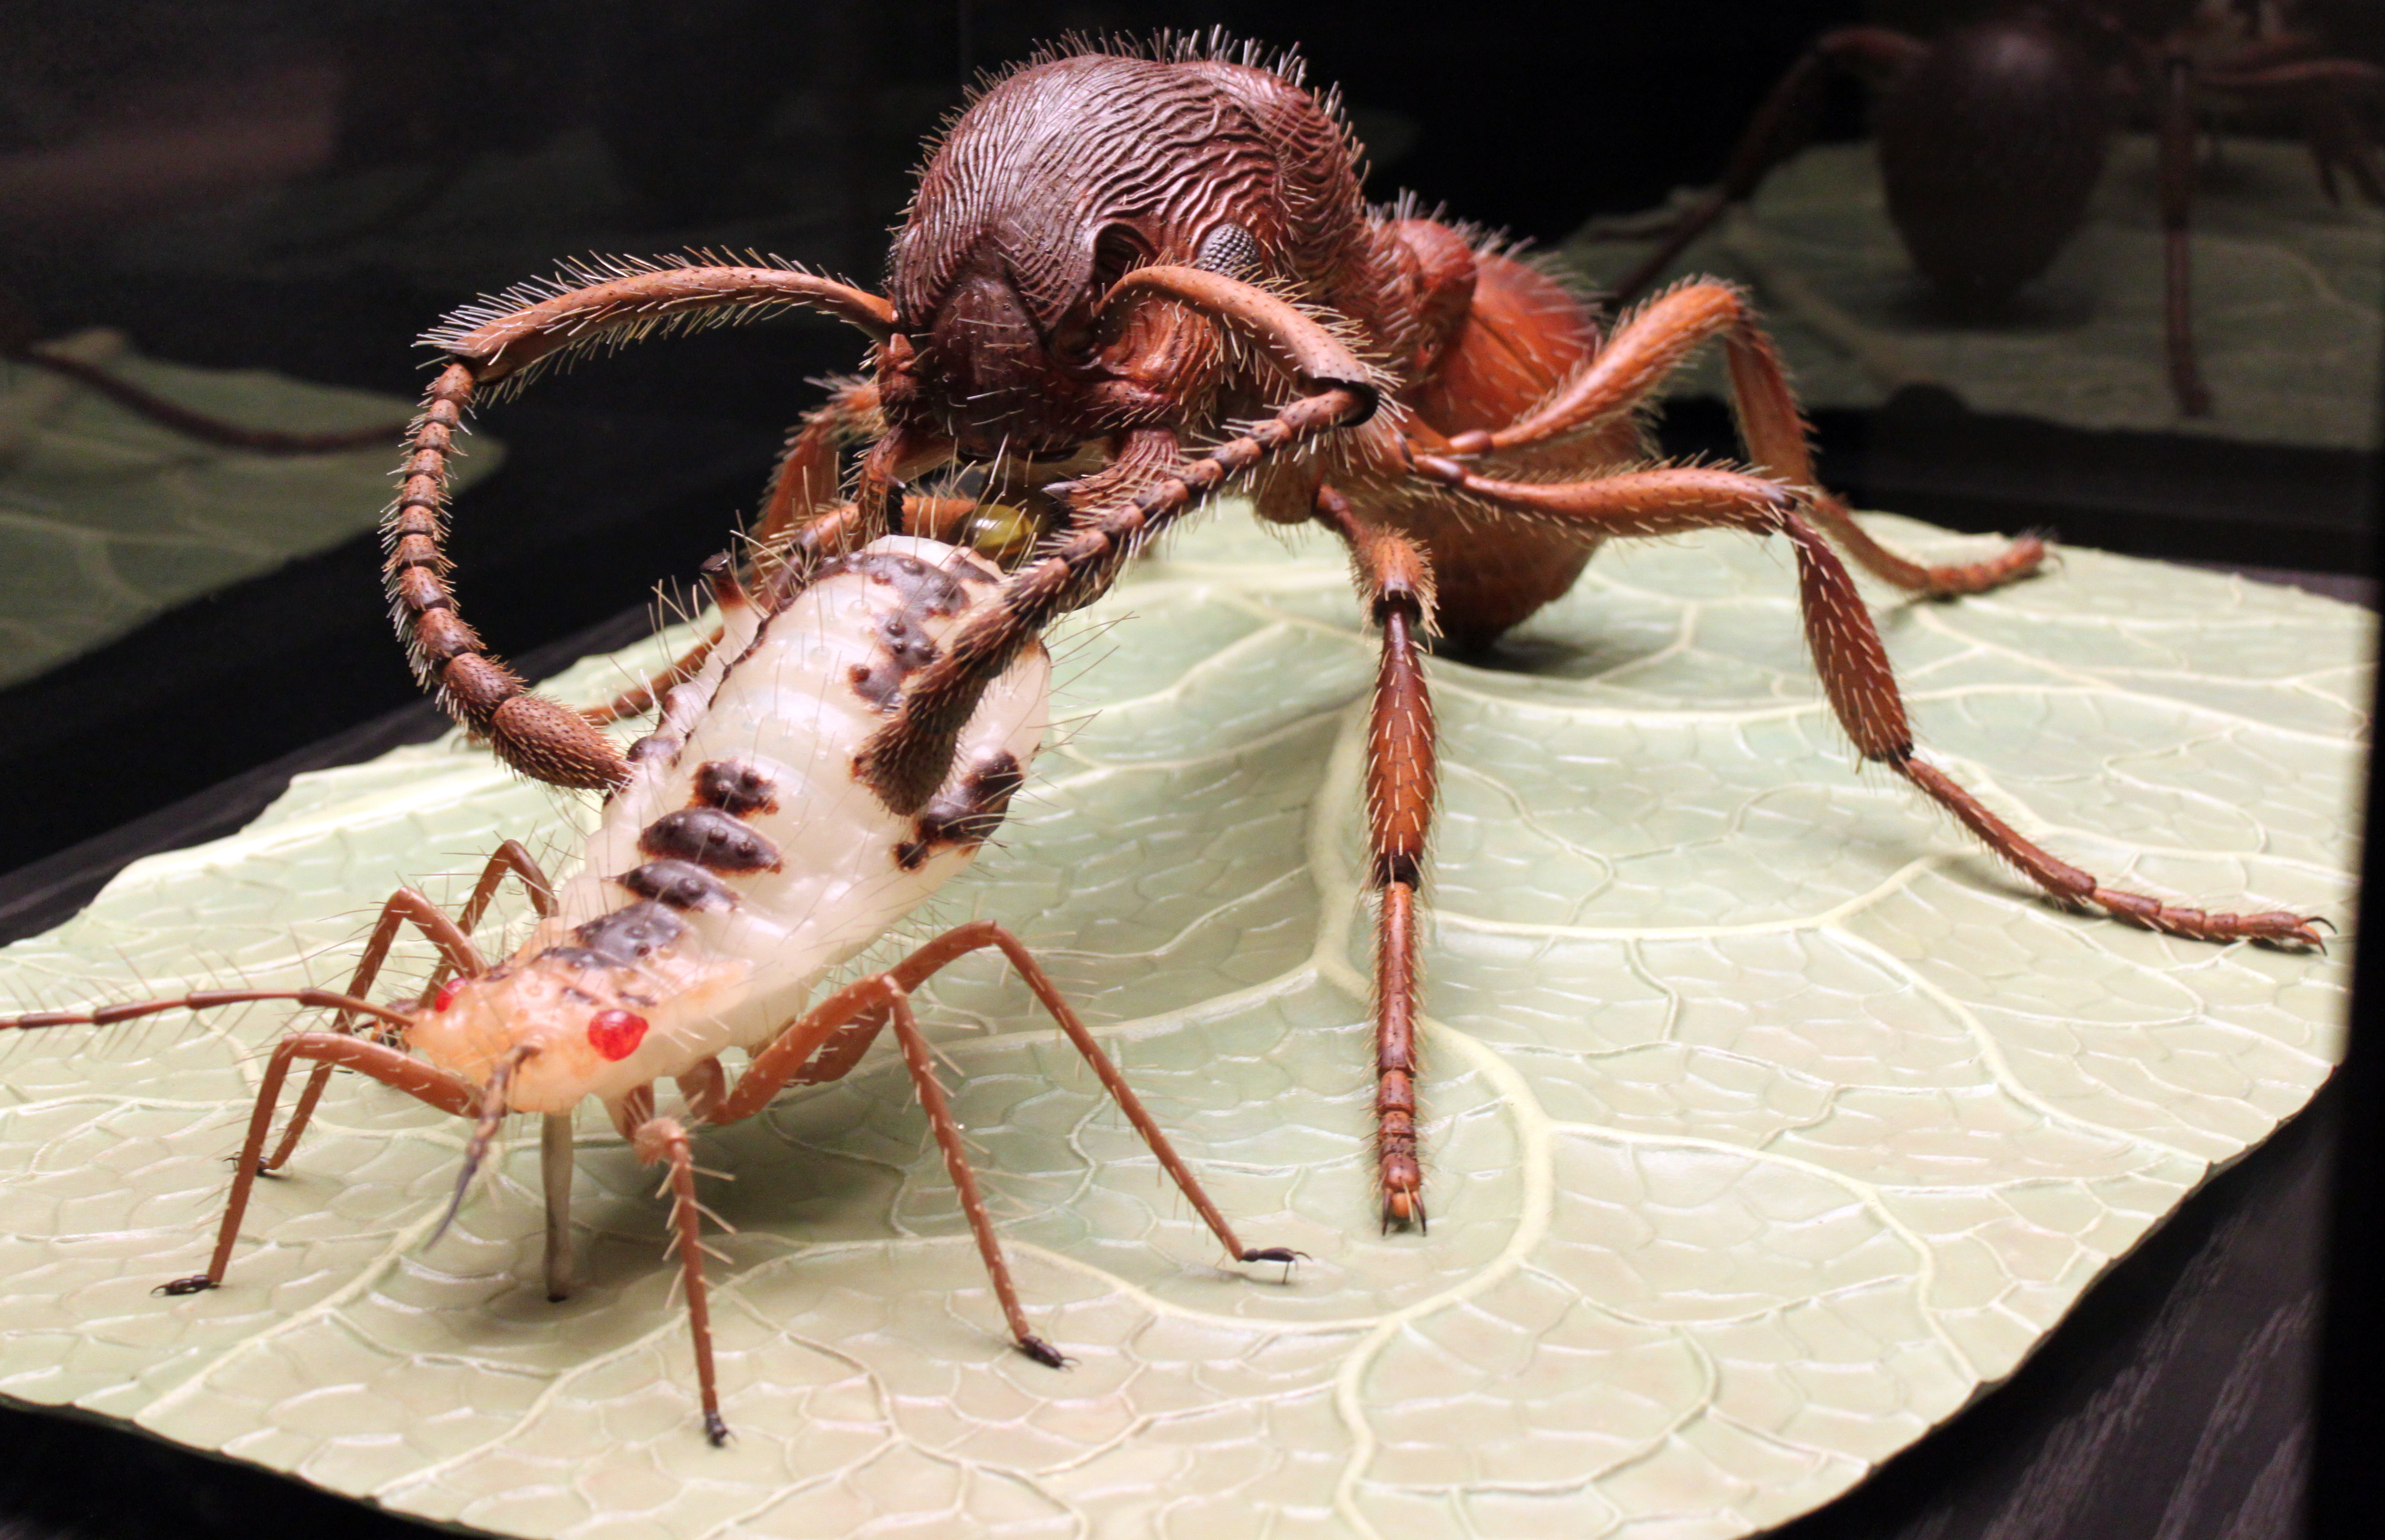 Museum of Natural History Berlin: a model of a red ant (Myrmica rubra) and an aphid (Periphyllus aceris), made ​​by Alfred Keller in the year 1947.